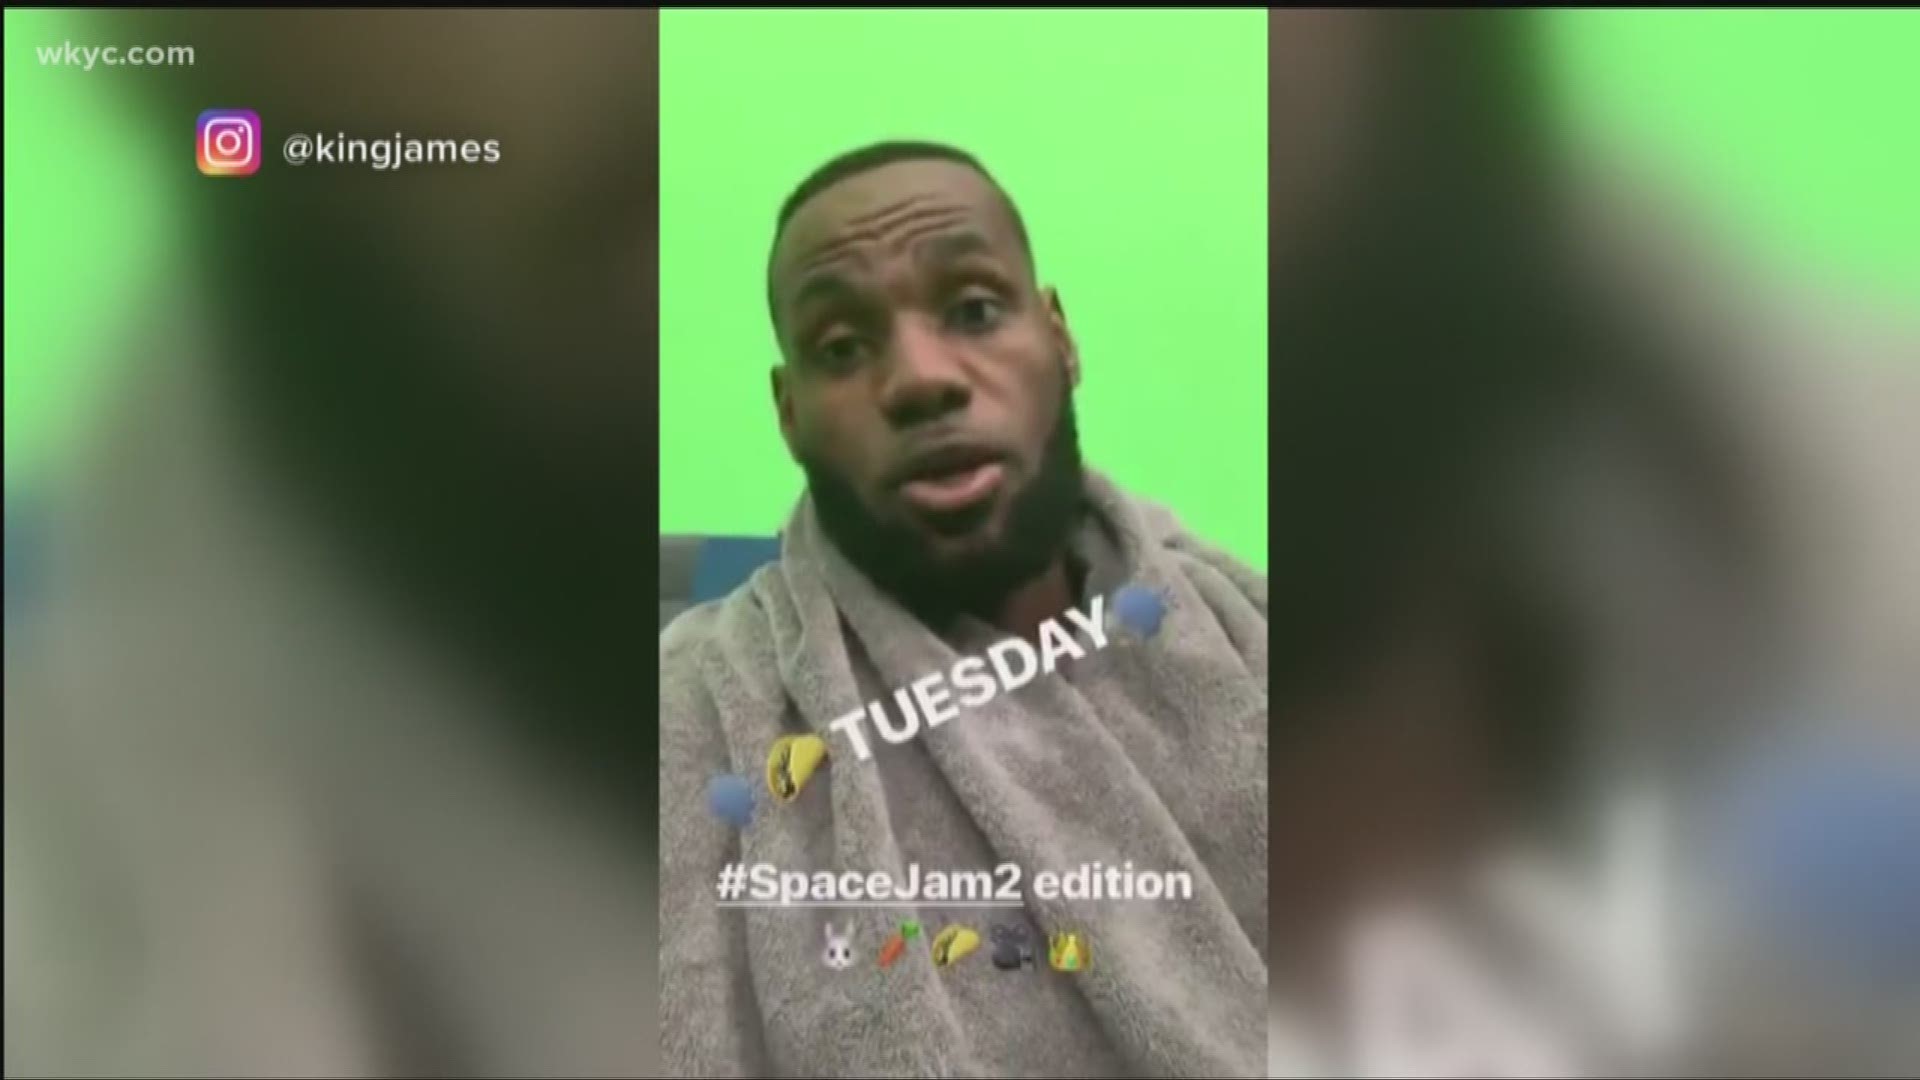 Filming a movie couldn't stop LeBron James from celebrating his favorite day of the week.